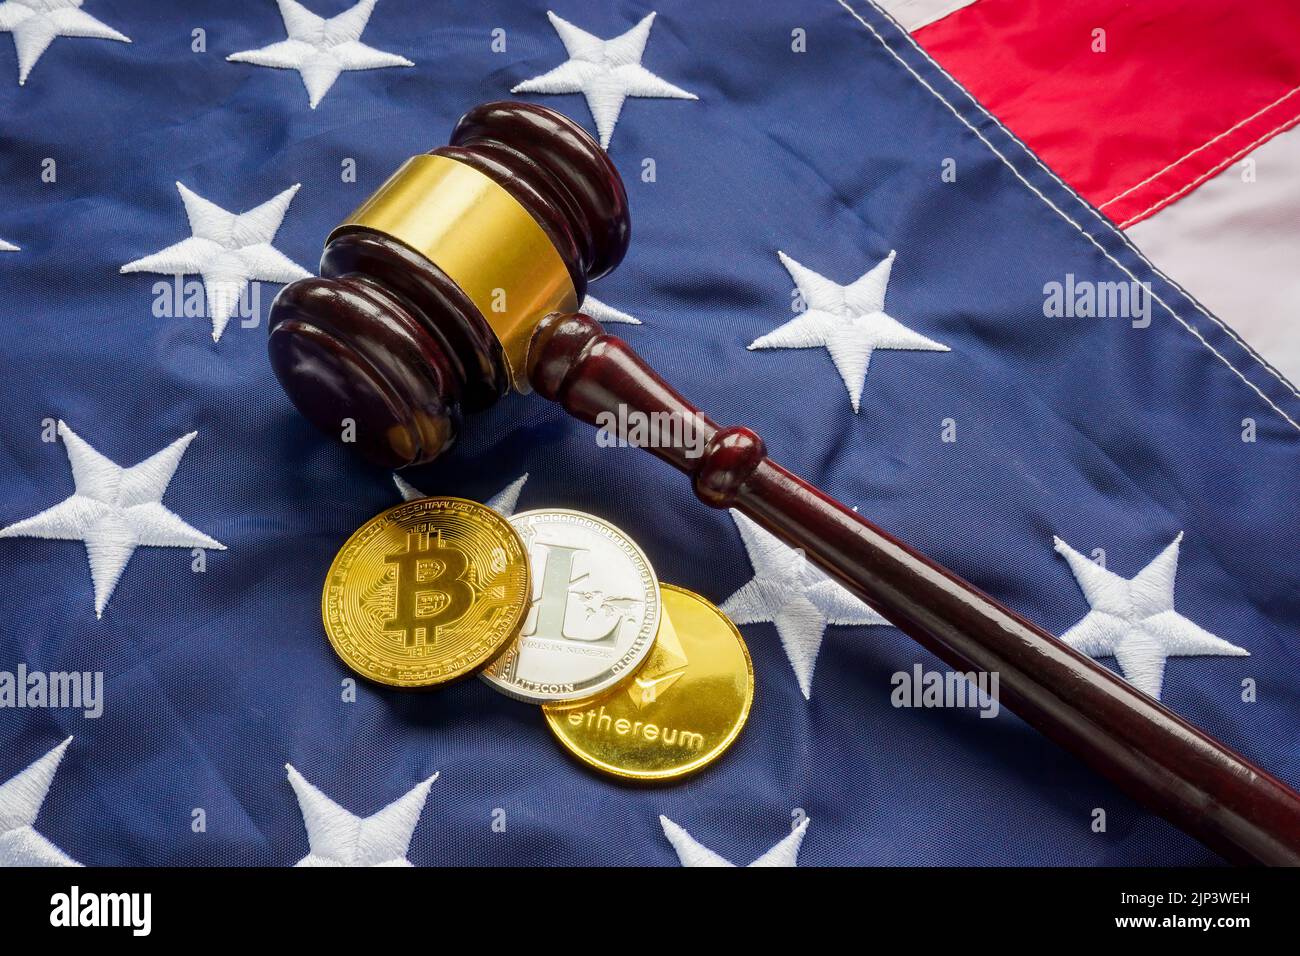 USA cryptocurrency law concept. Coins, flag and gavel. Stock Photo